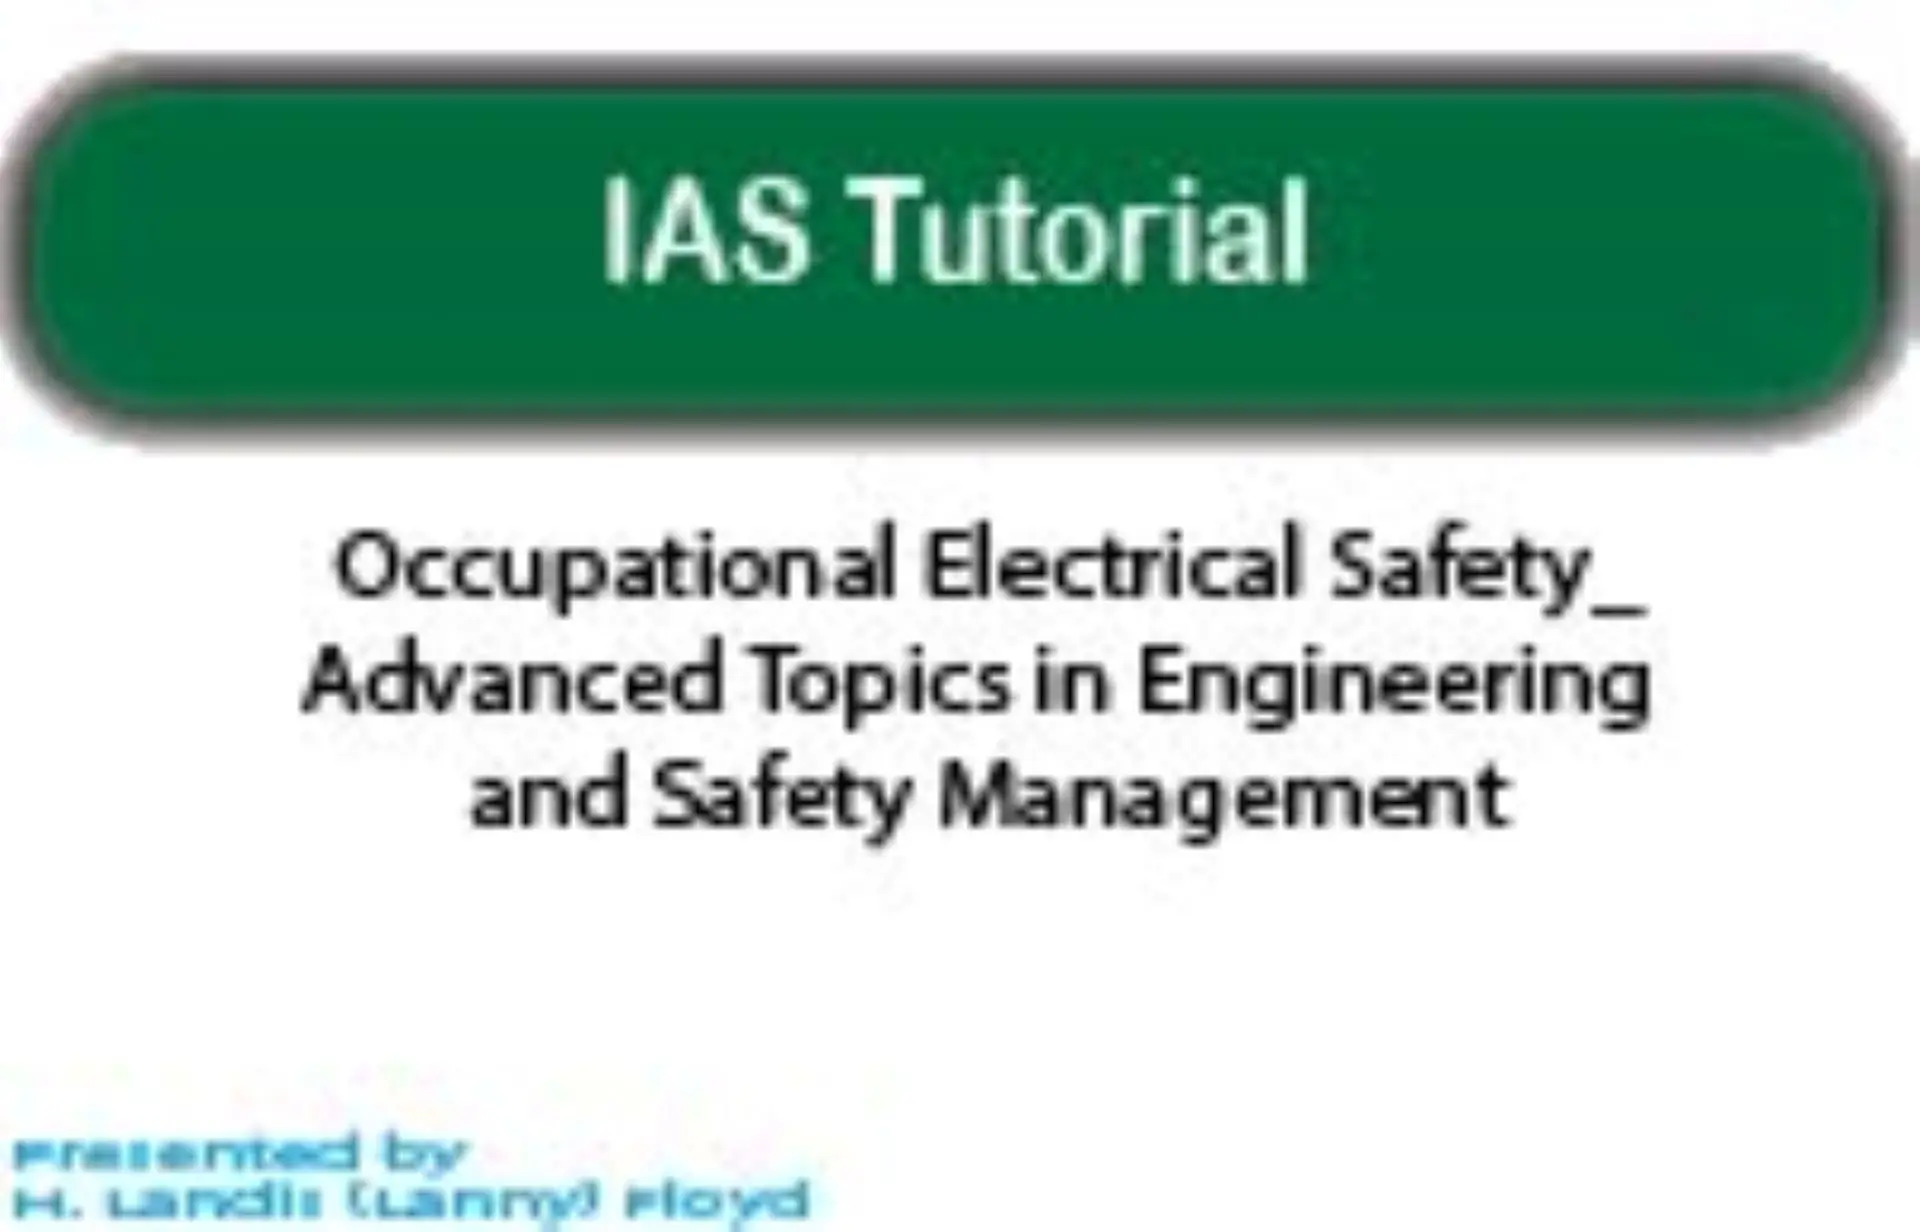 Occupational Electrical Safety: Advanced Topics in Engineering and Safety Management